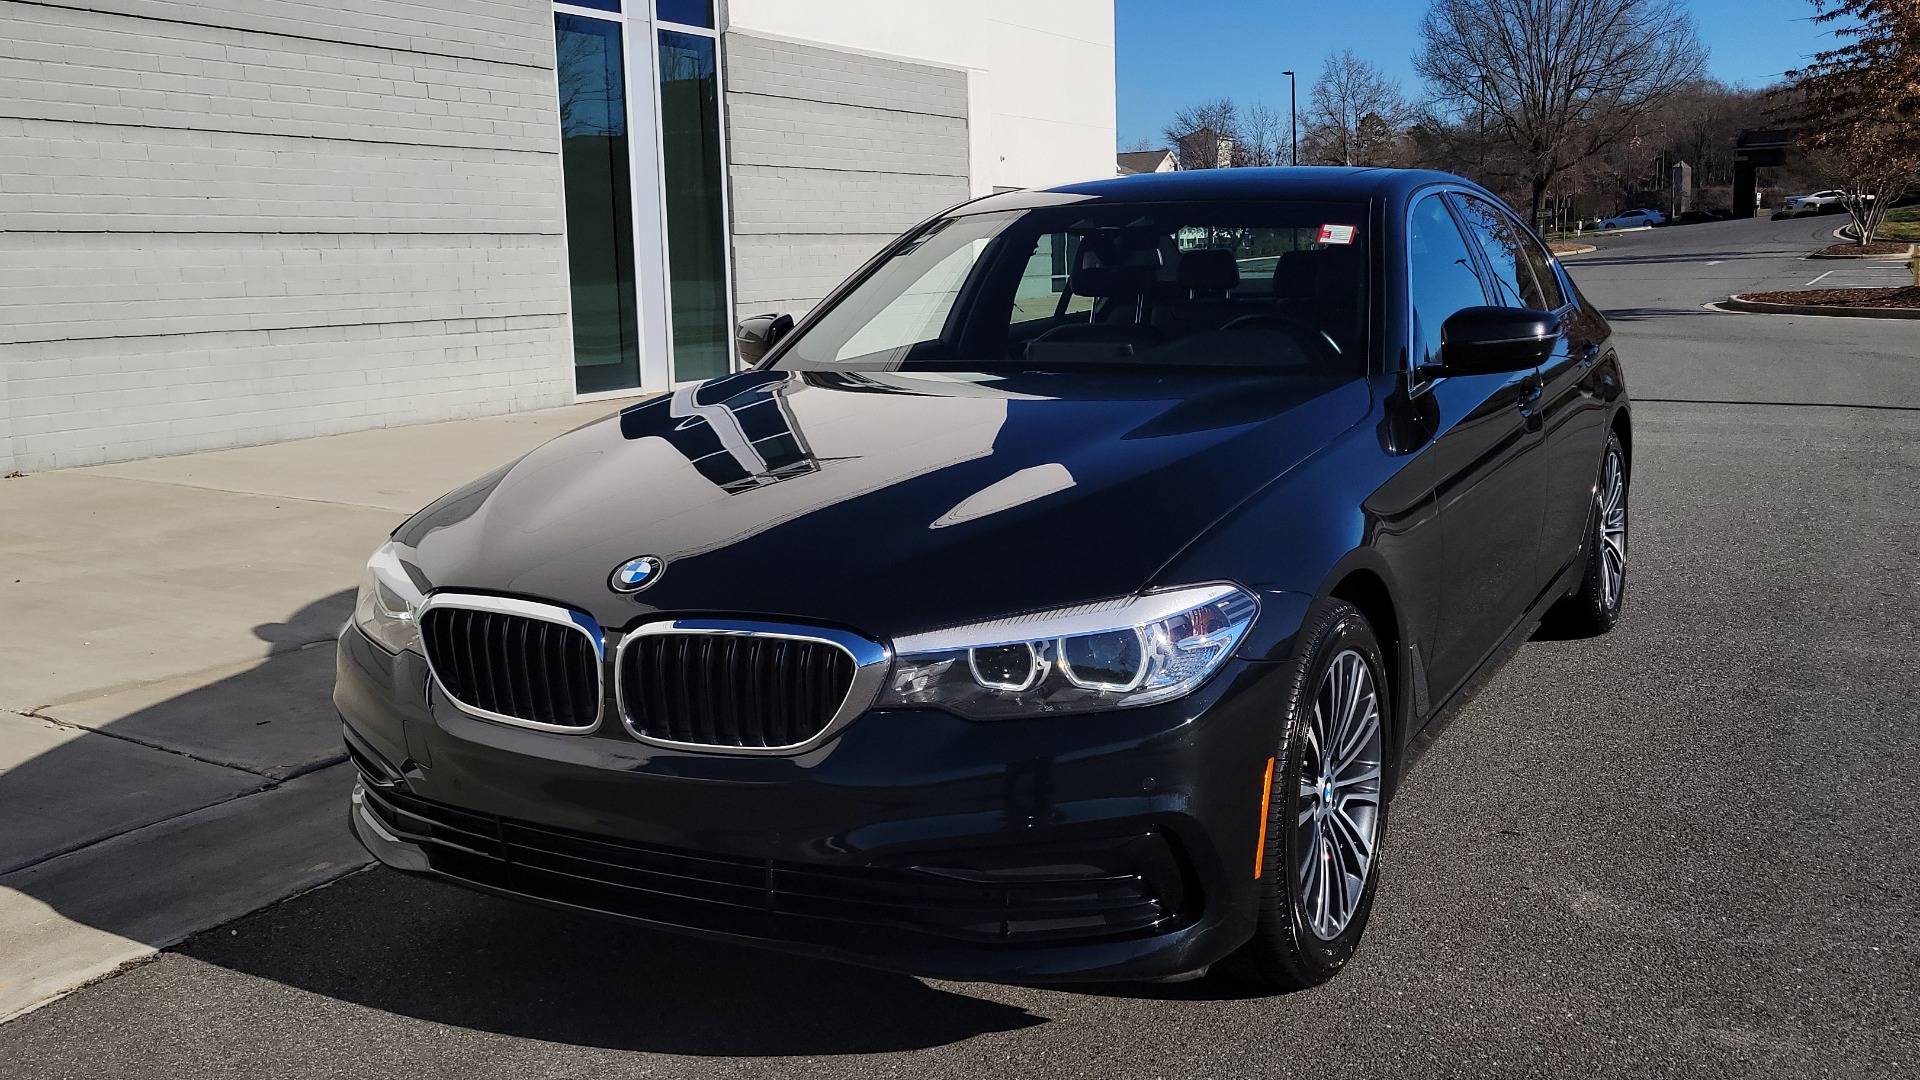 Used 2019 BMW 5 SERIES 530I XDRIVE CONVENIENCE PKG / NAV / SUNROOF / REARVIEW for sale $41,595 at Formula Imports in Charlotte NC 28227 2